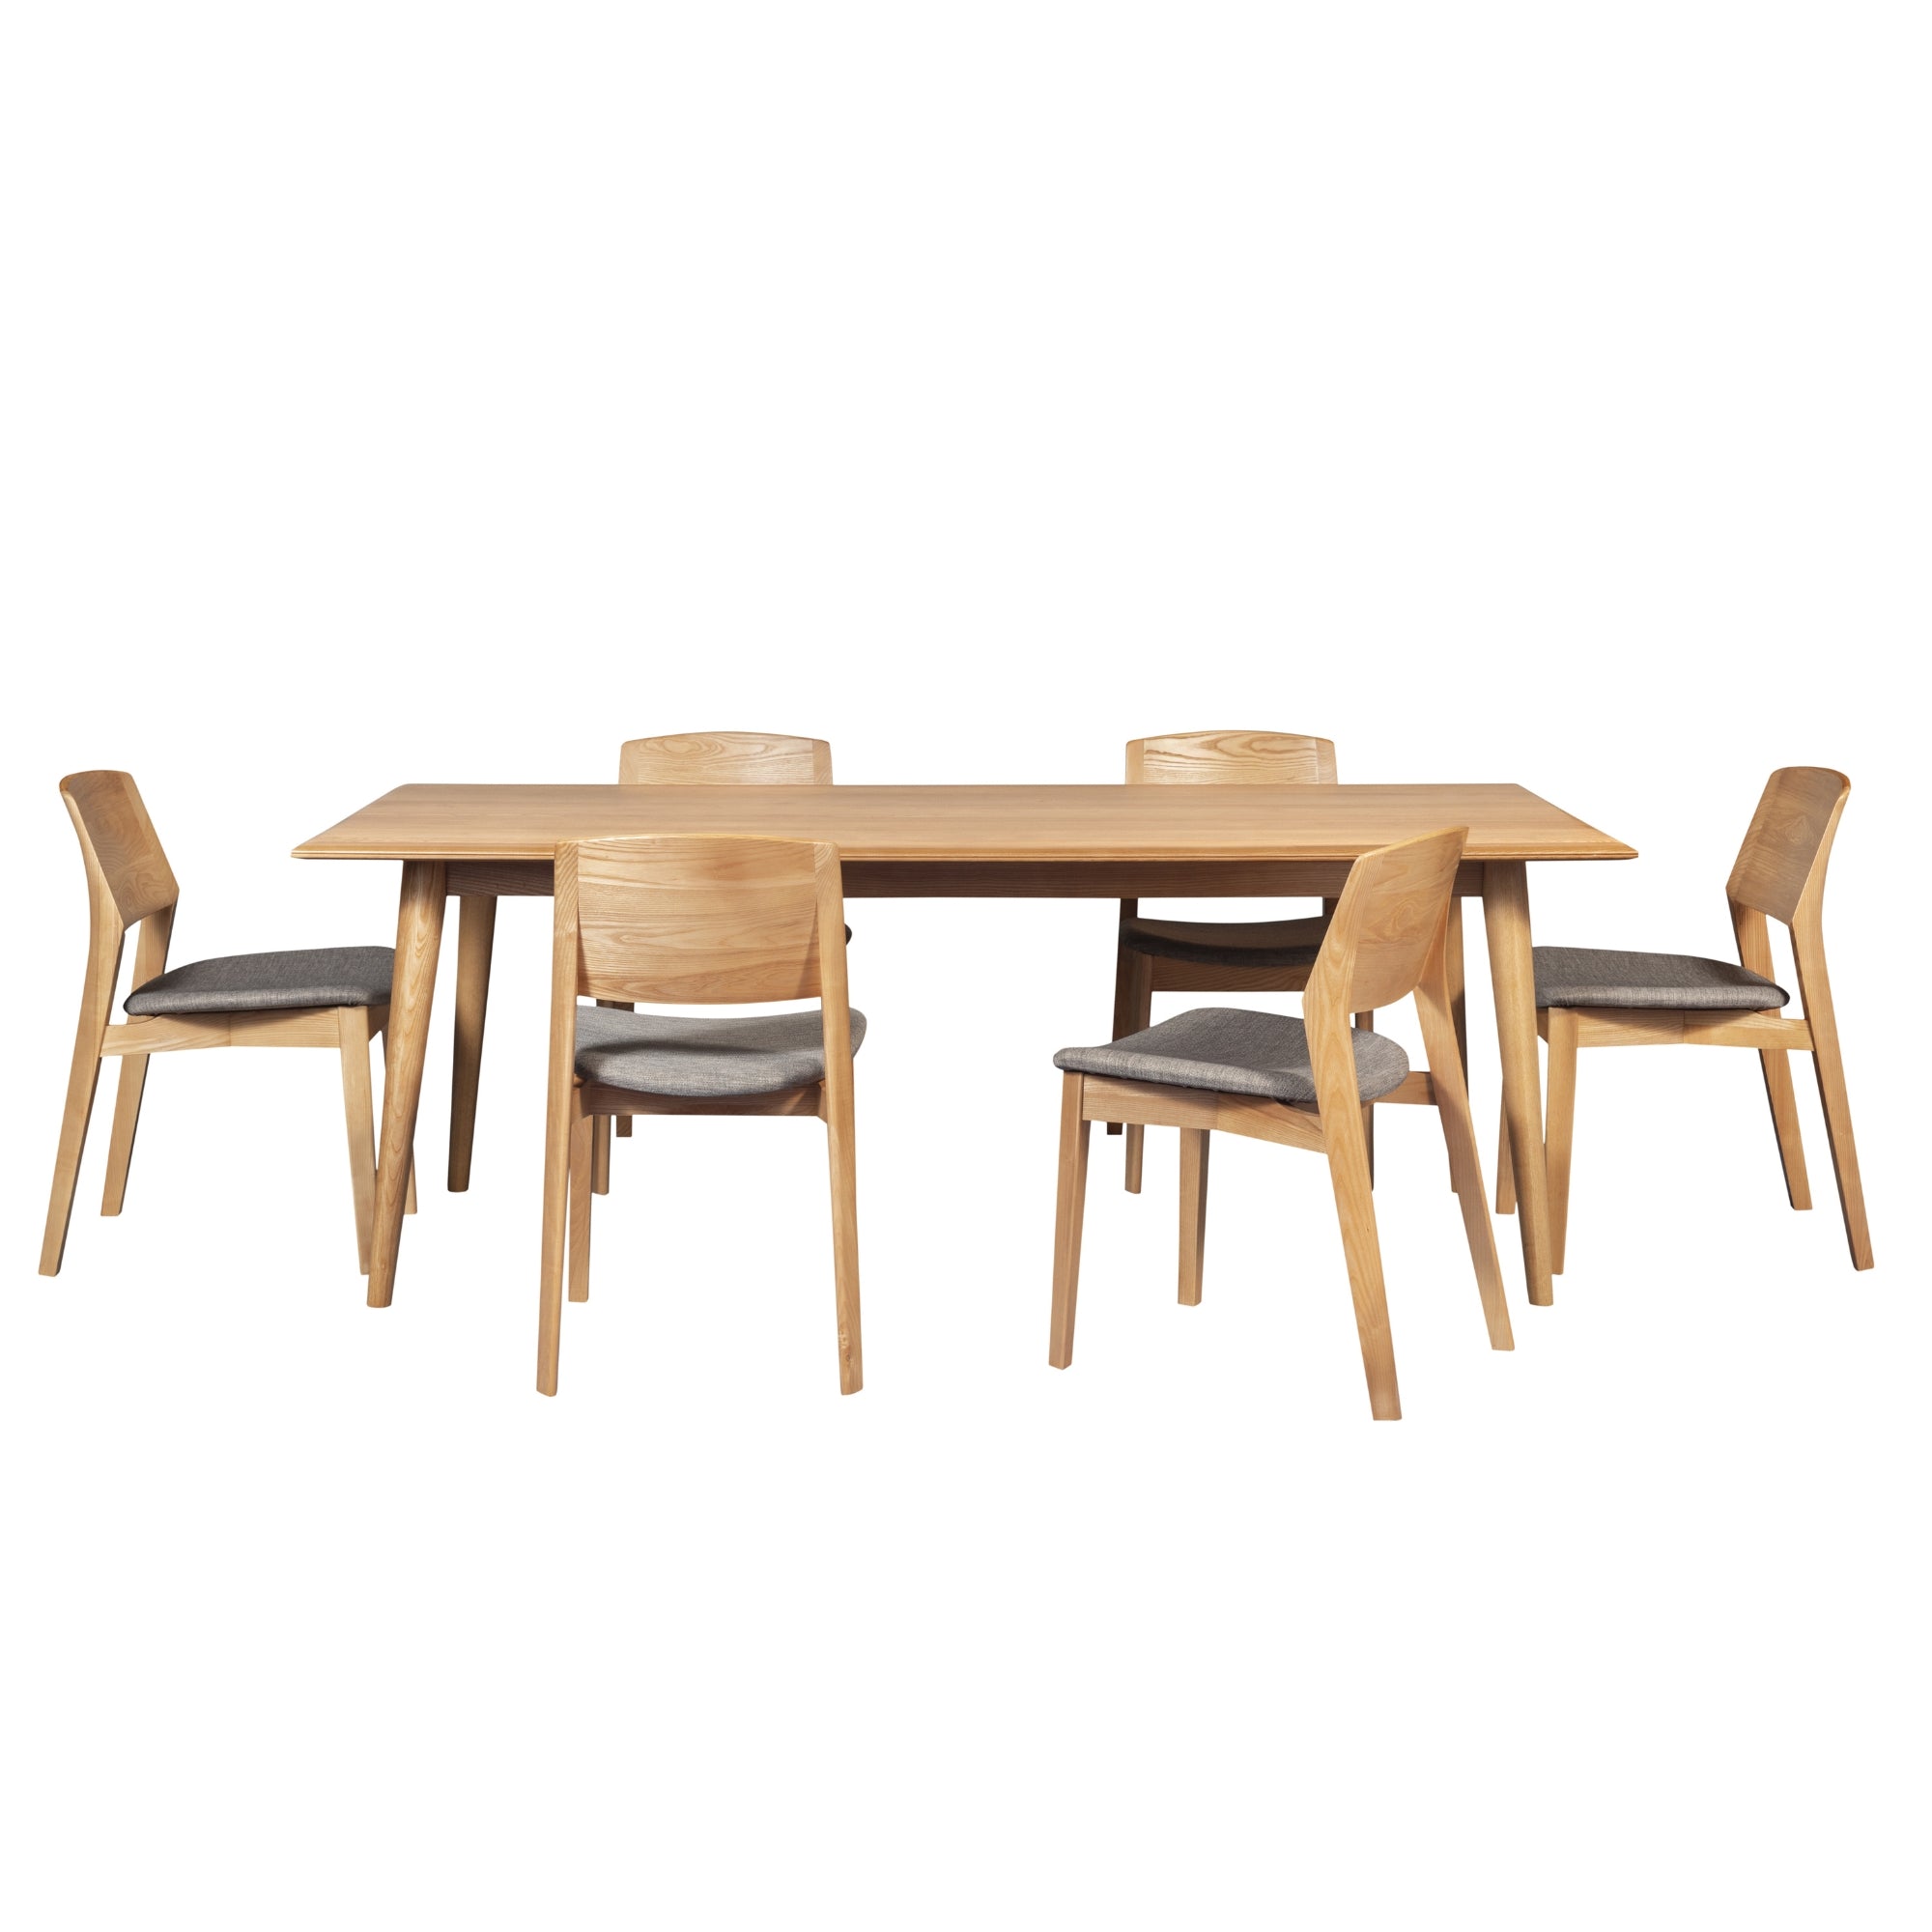 Emilio 7pc 180cm Dining Table Set Fabric Chair Solid Ash Wood Oak - SILBERSHELL